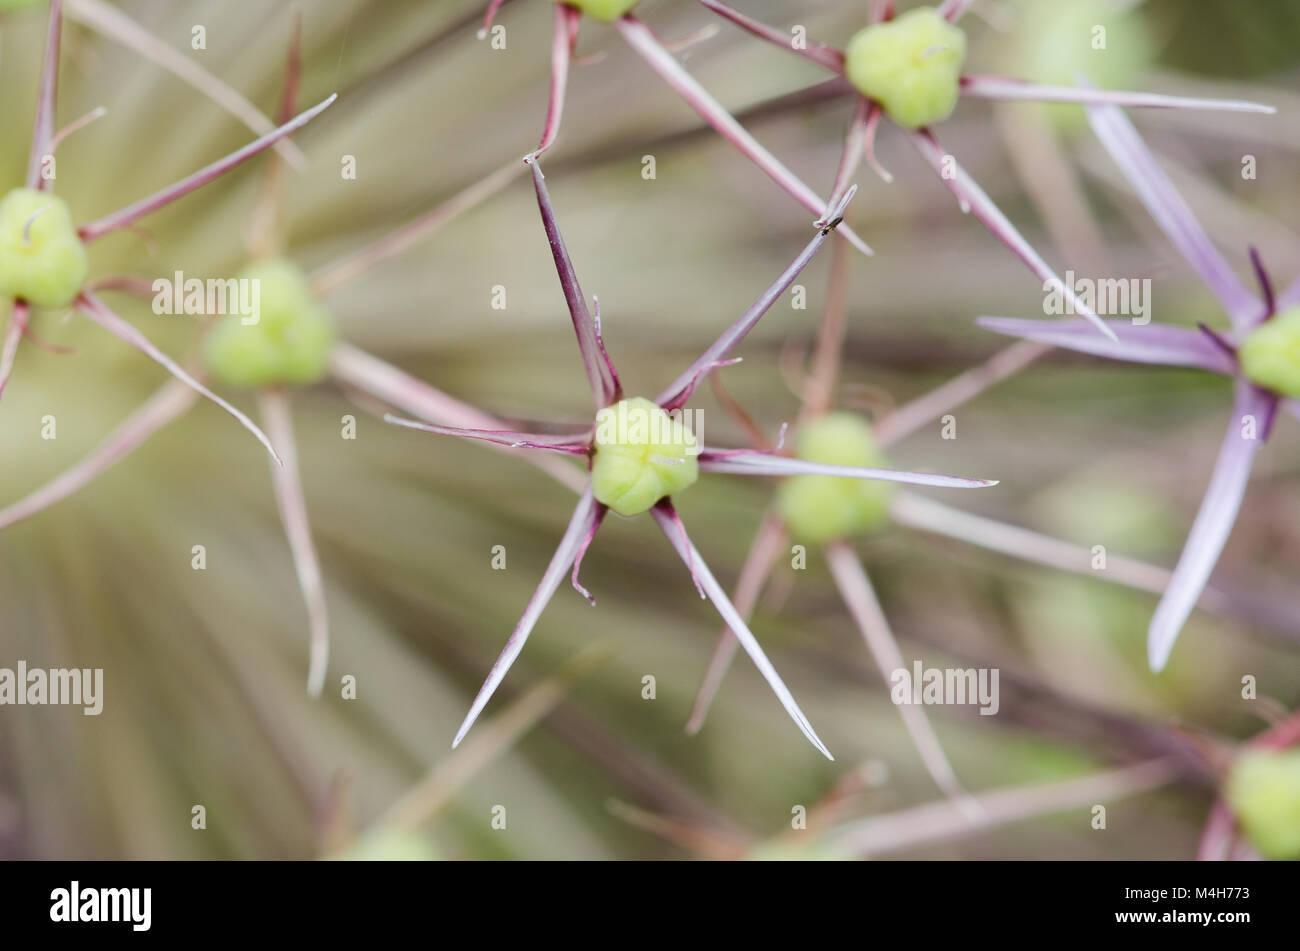 Alium Flower in extreme close up after flowering in pattern Stock Photo